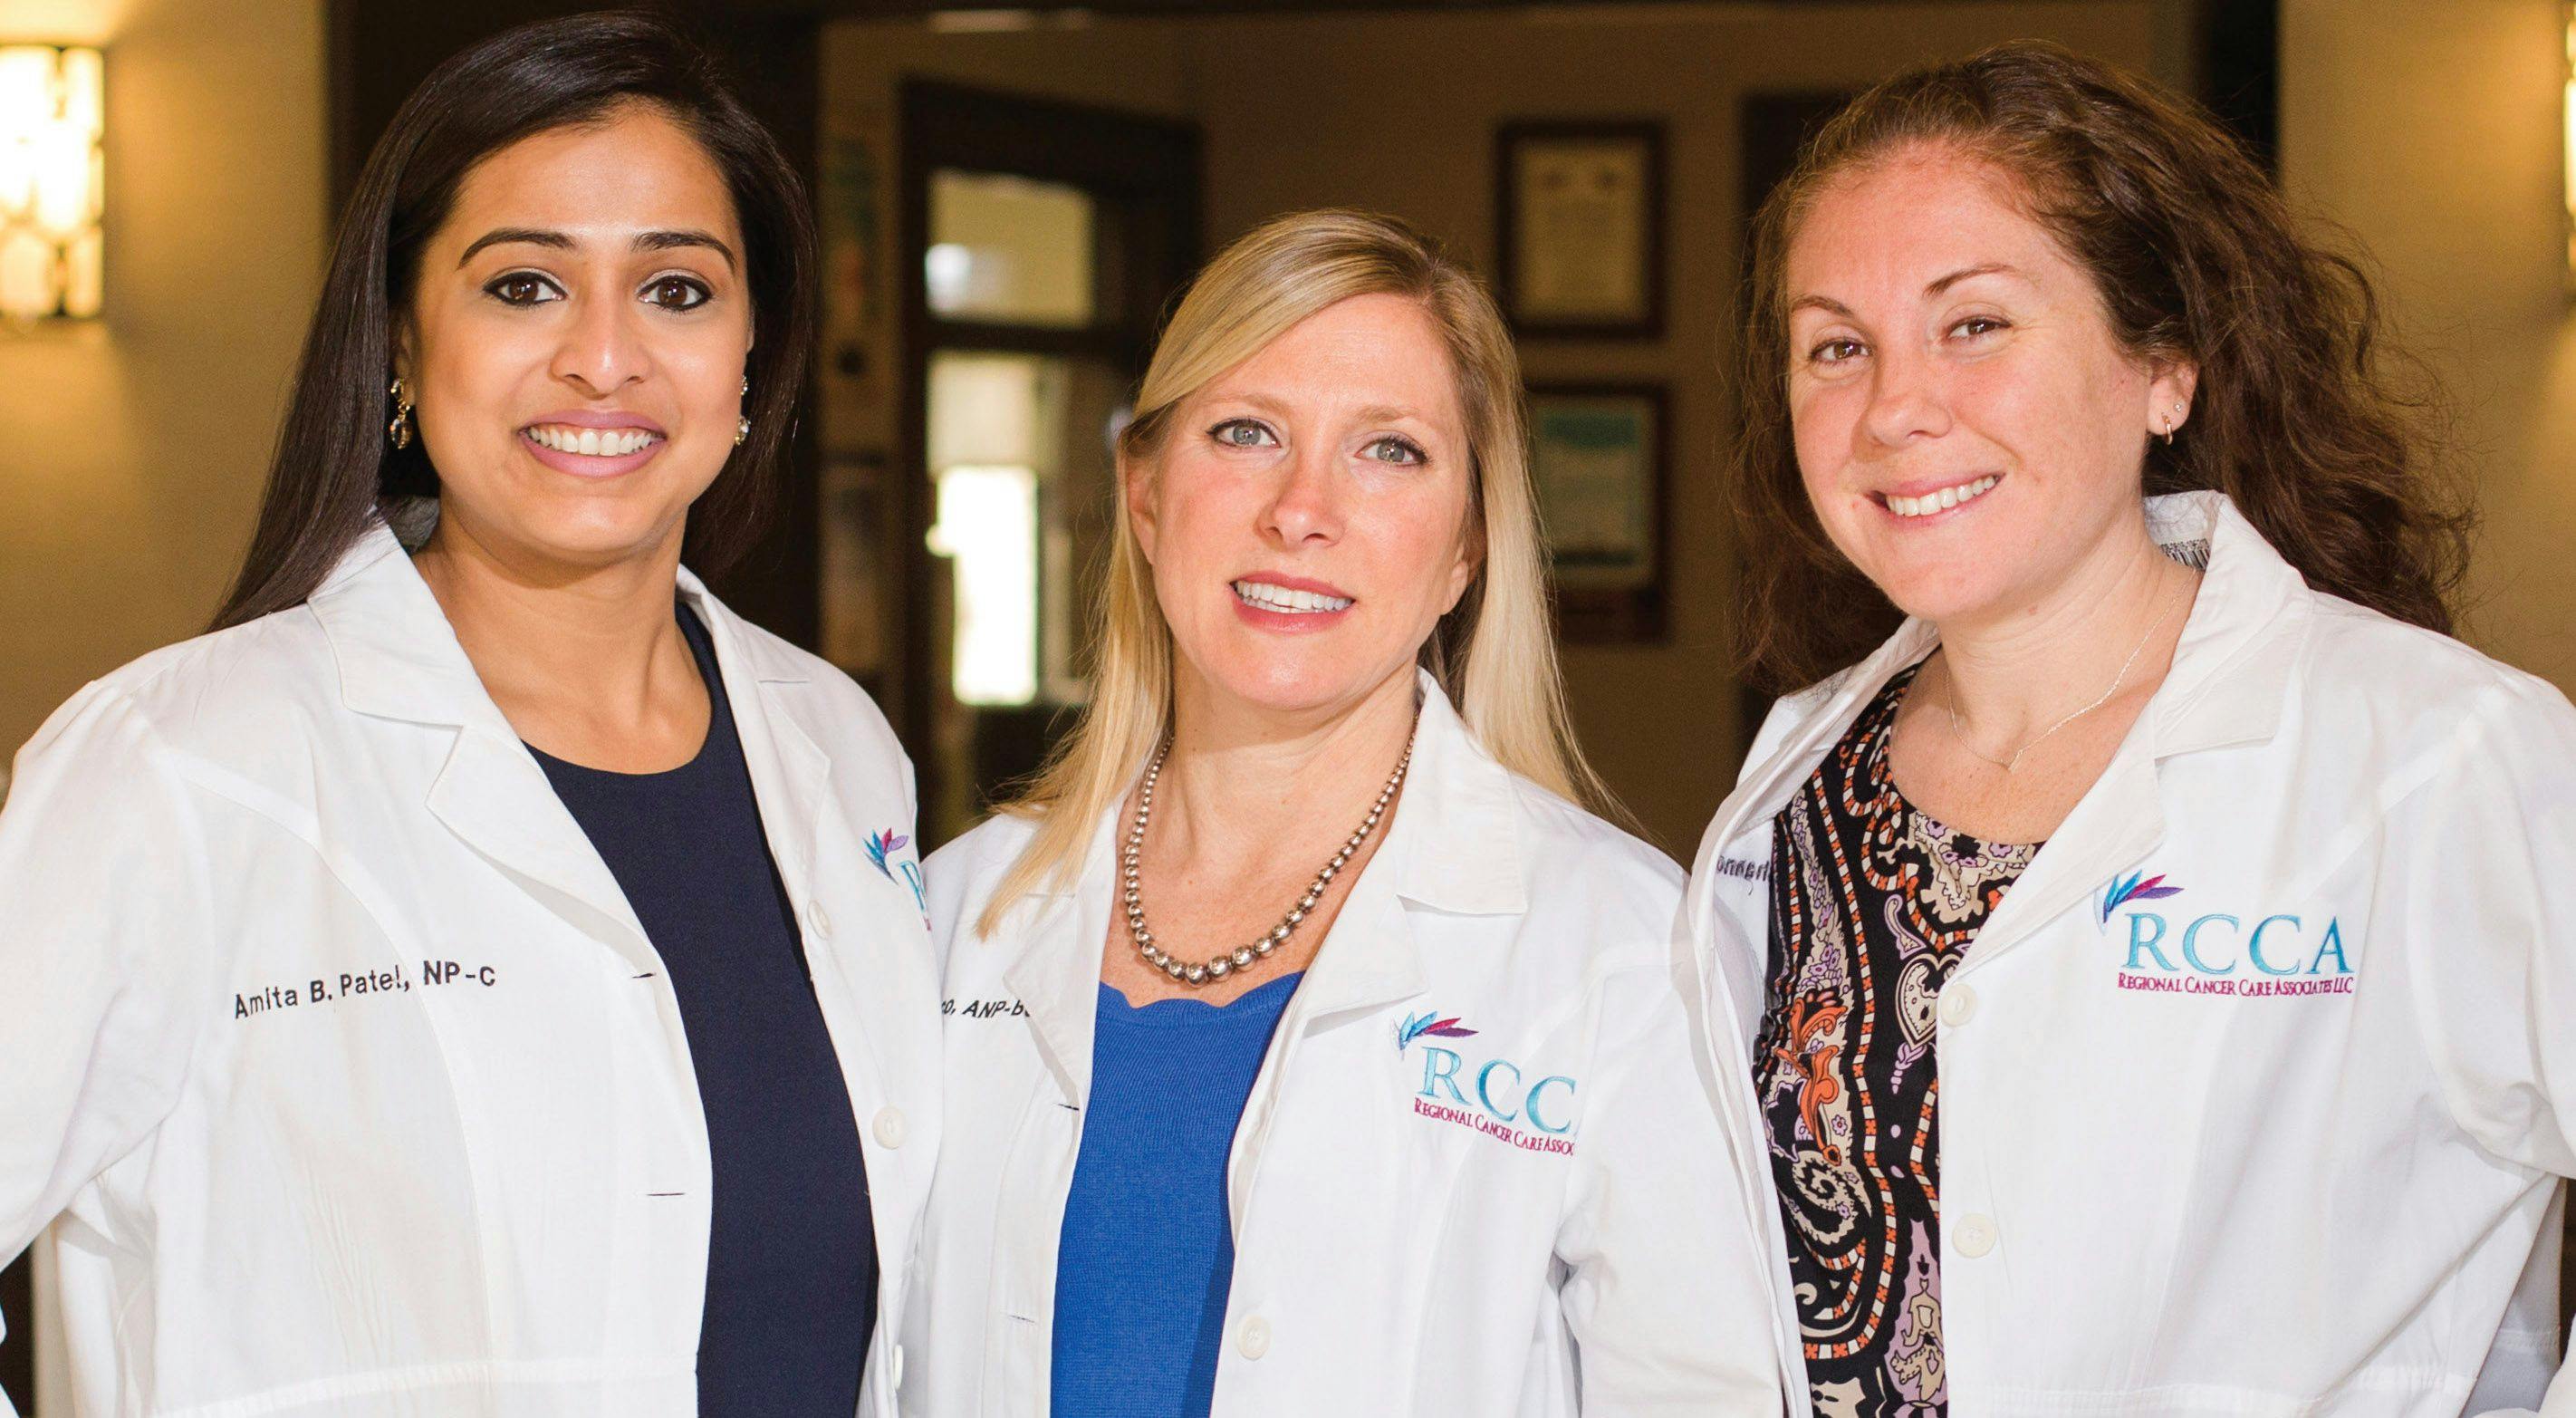 From left: Amita Patel, NP-C, AOCNP,
Tina Flocco, APN-BC, AOCNP, and Shannon Woerner, APN, AOCNP
 - PHOTOS BY HEATHER PALECEK